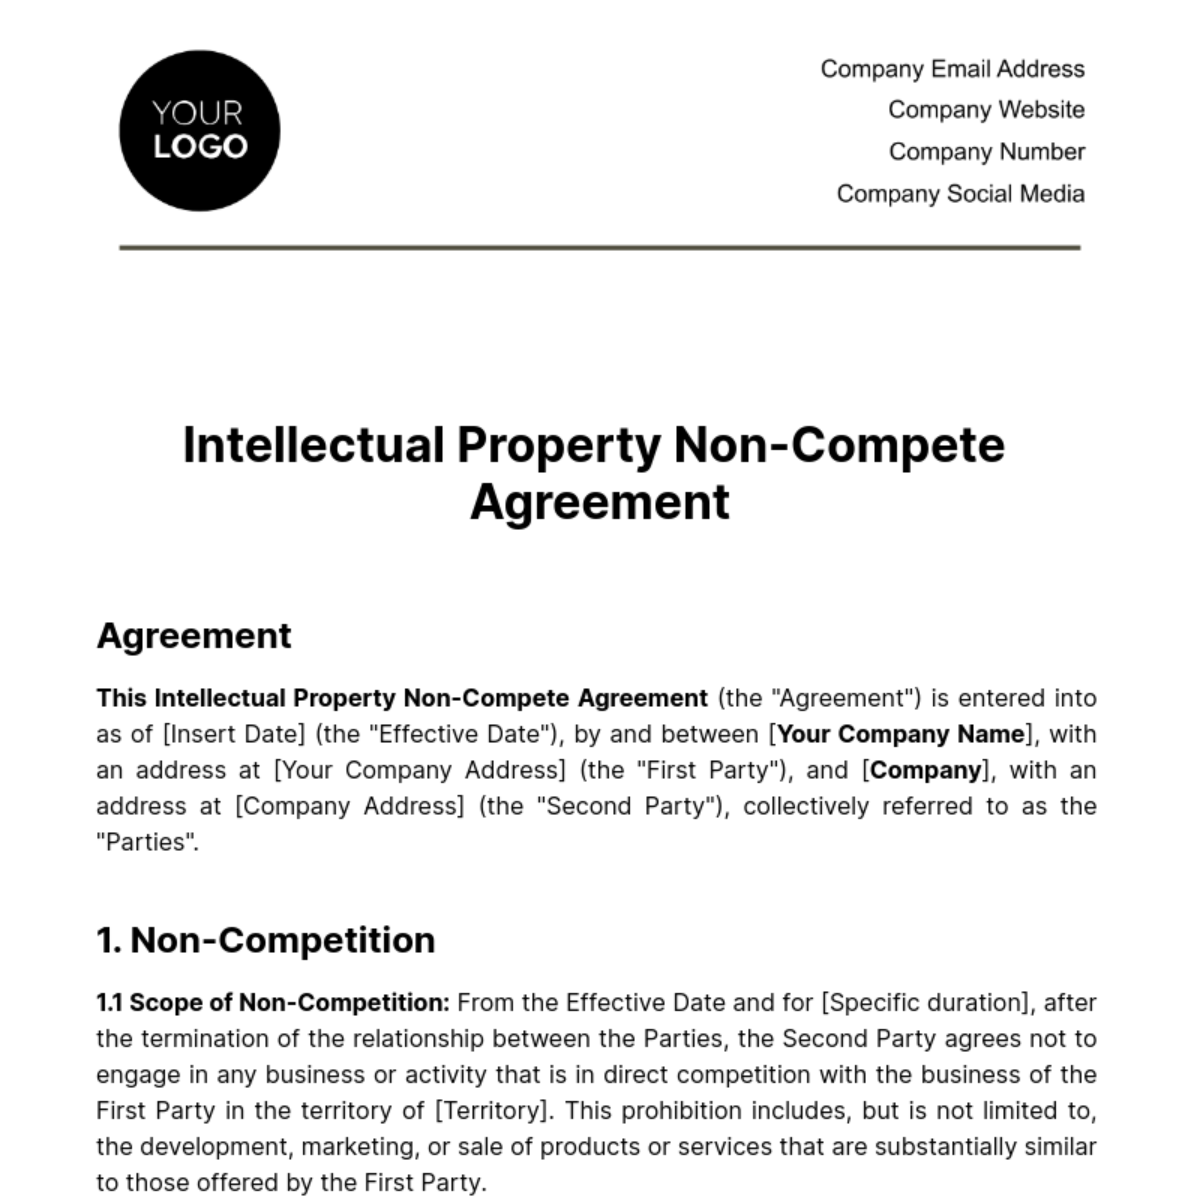 Free Legal Intellectual Property Non-Compete Agreement Template